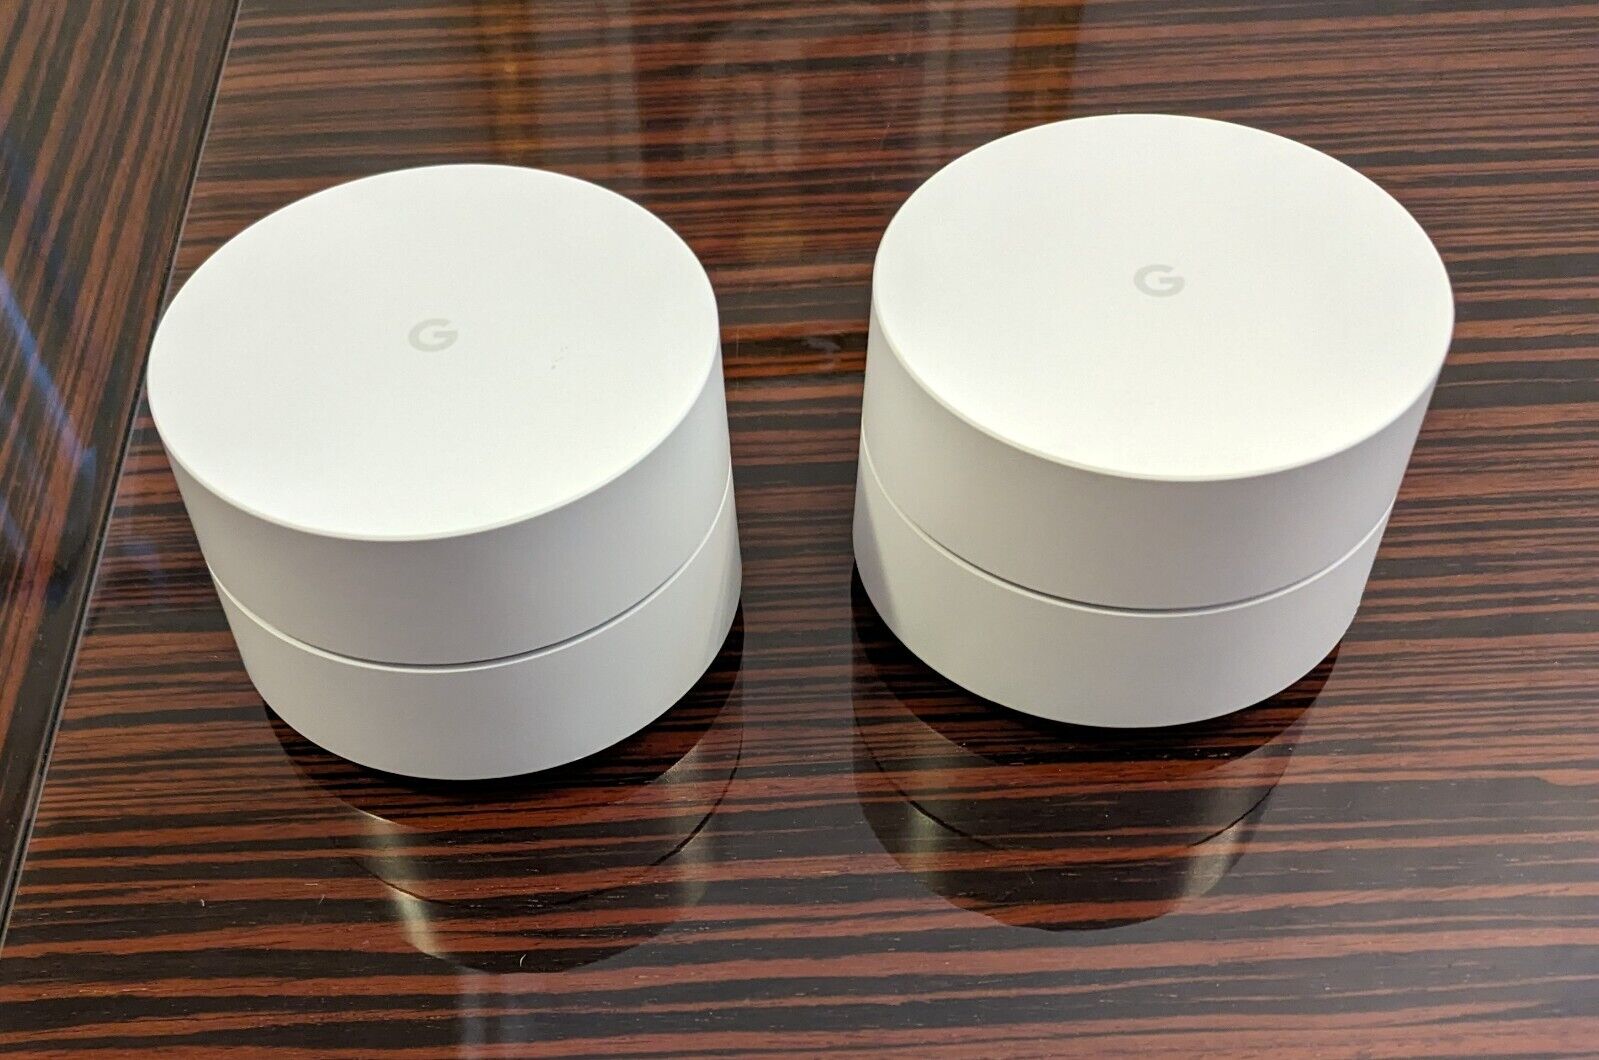 2x Google WiFi AC-1304 1200Mbps Wireless Mesh Router AC1200 NO ADAPTERS